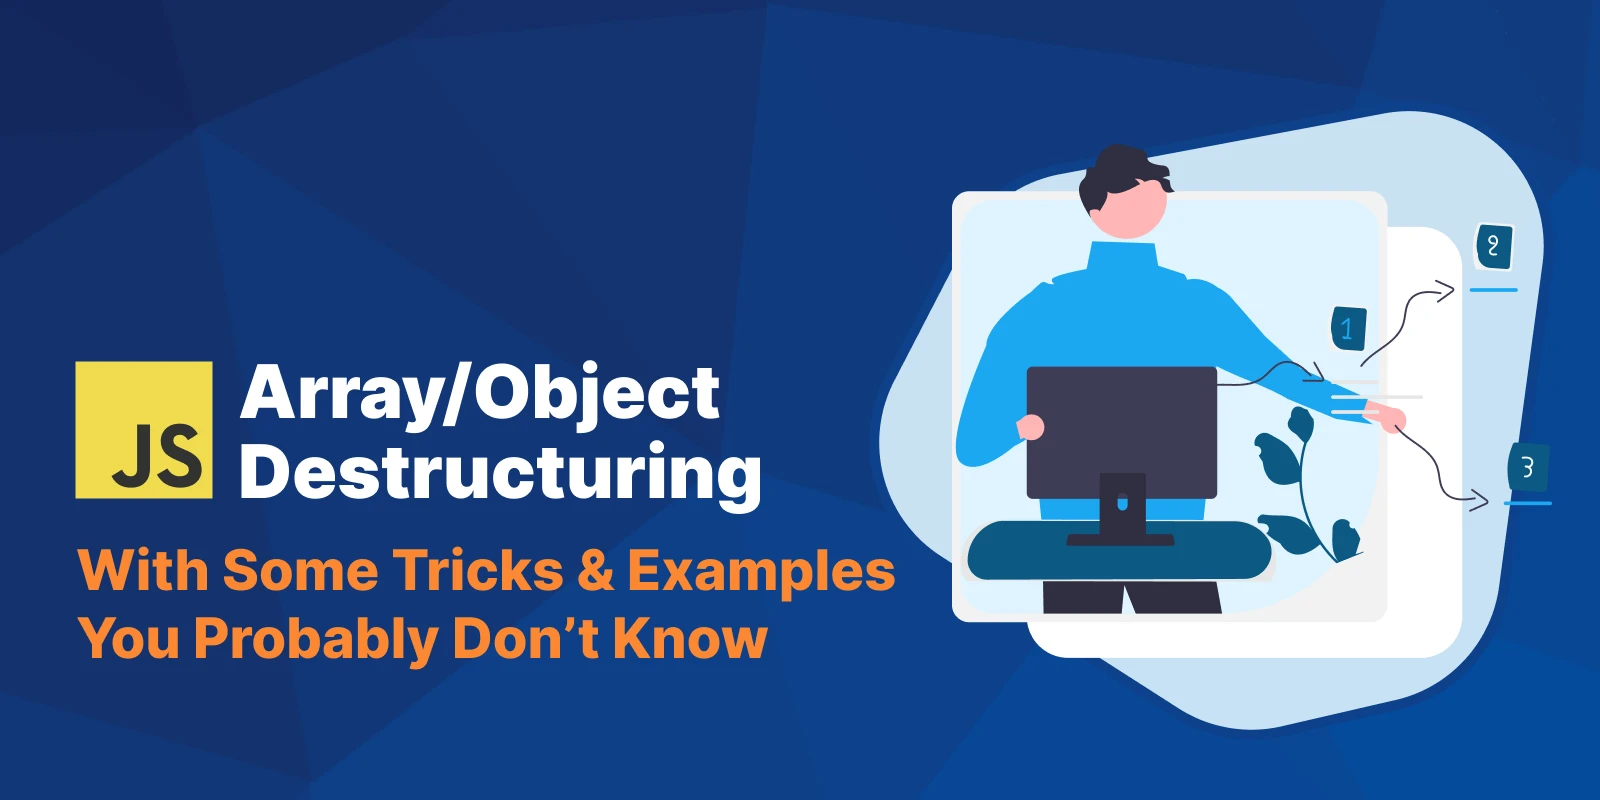 JavaScript Array/Object Destructuring Explained + Examples